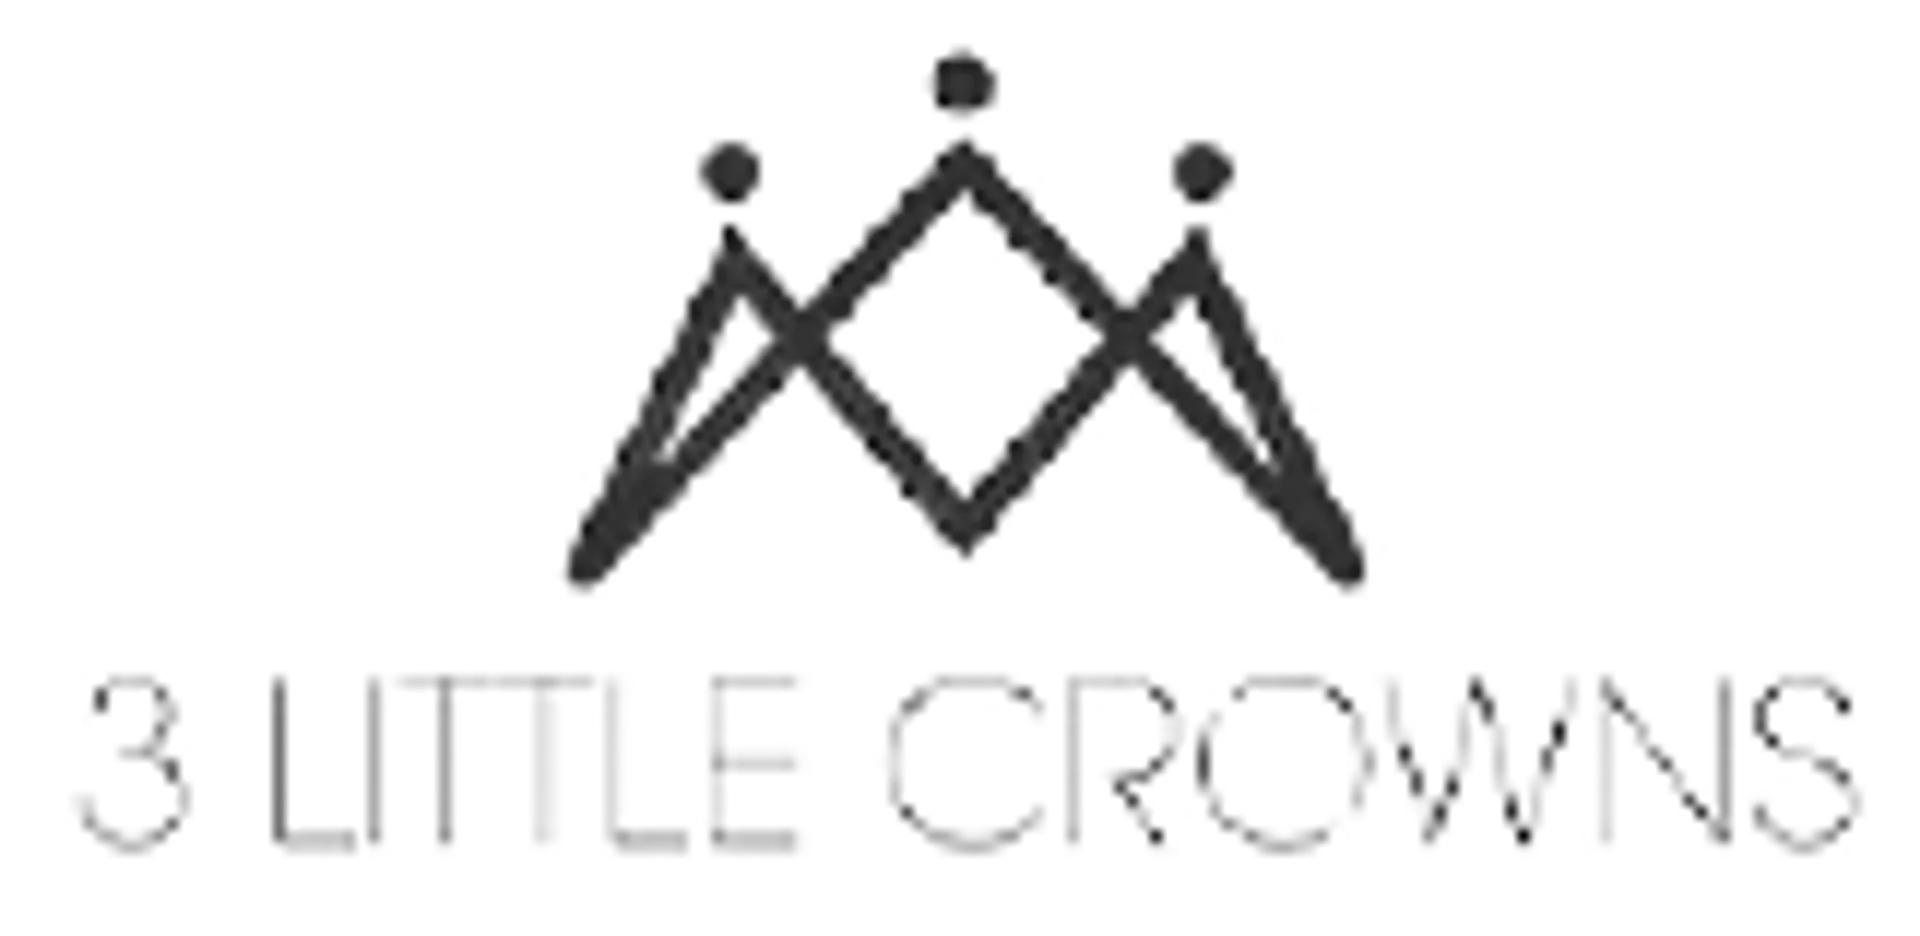 3 LITTLE CROWNS logo current weekly ad